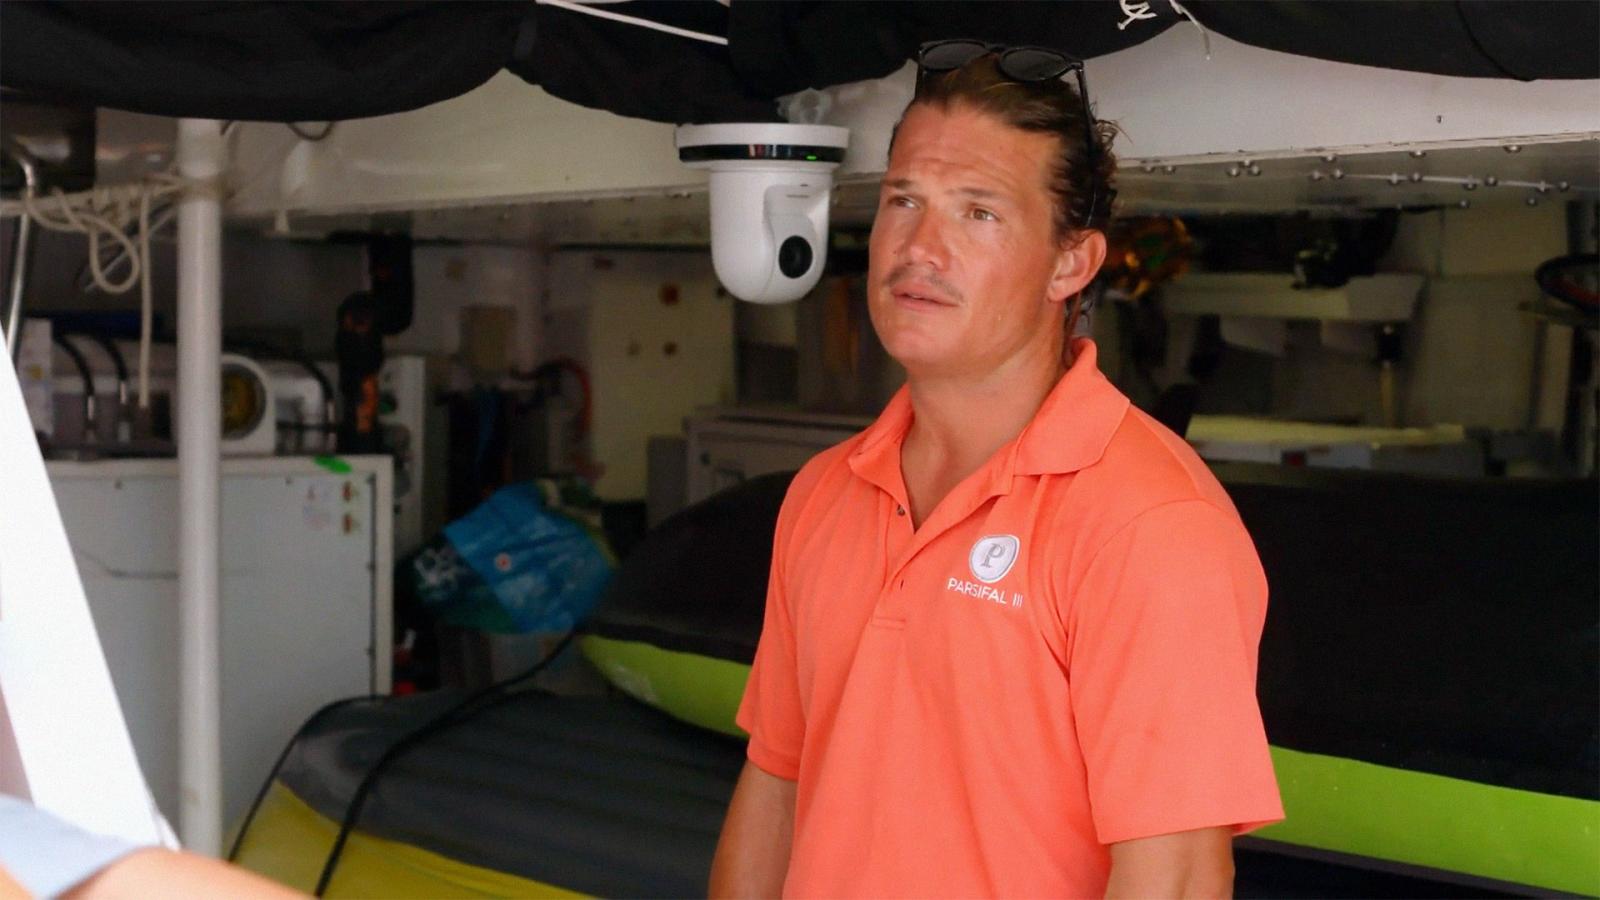 Why Gary From Below Deck Sailing Yacht Deserves More Love in Season 4 - image 1